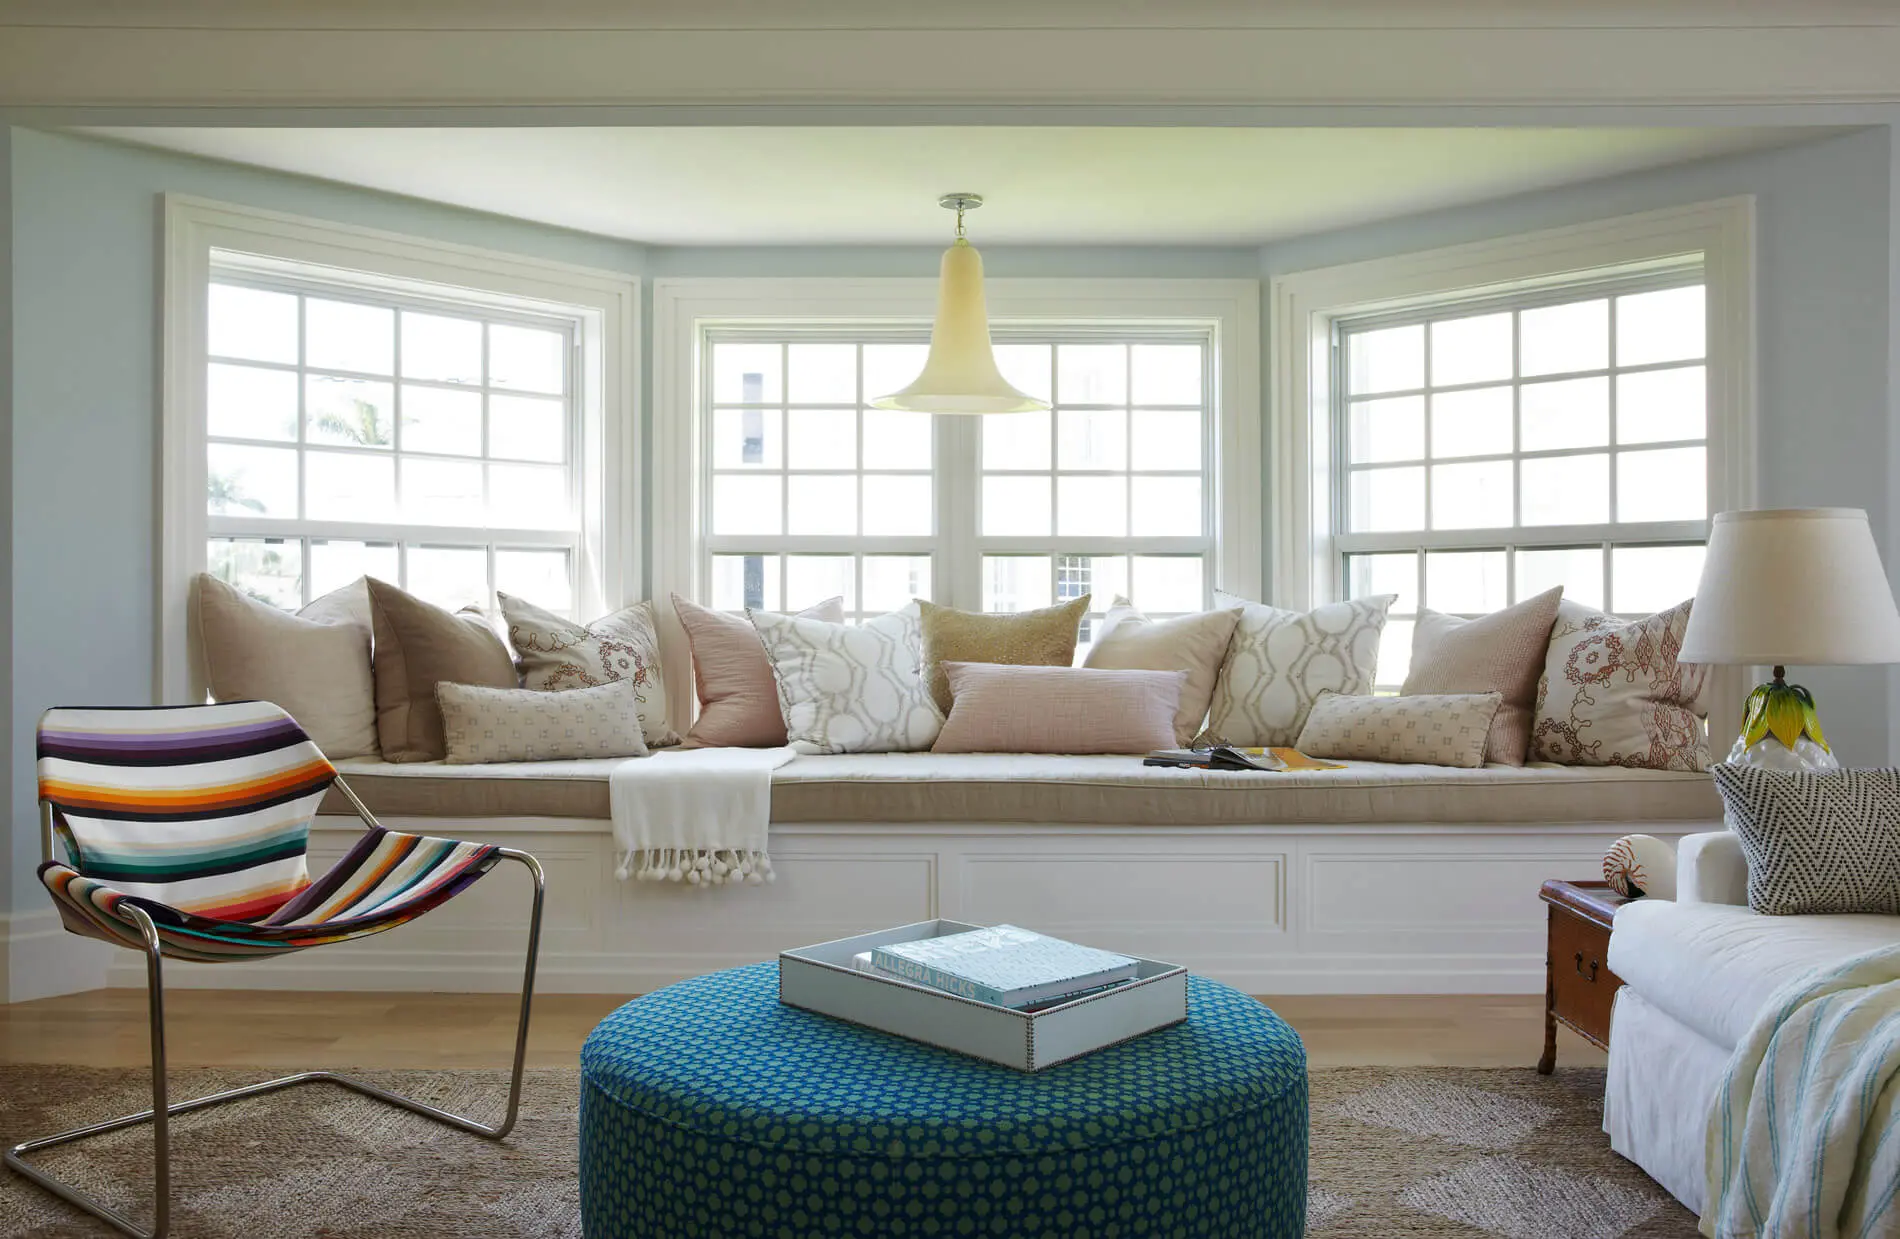 A living room with large windows and a blue ottoman.